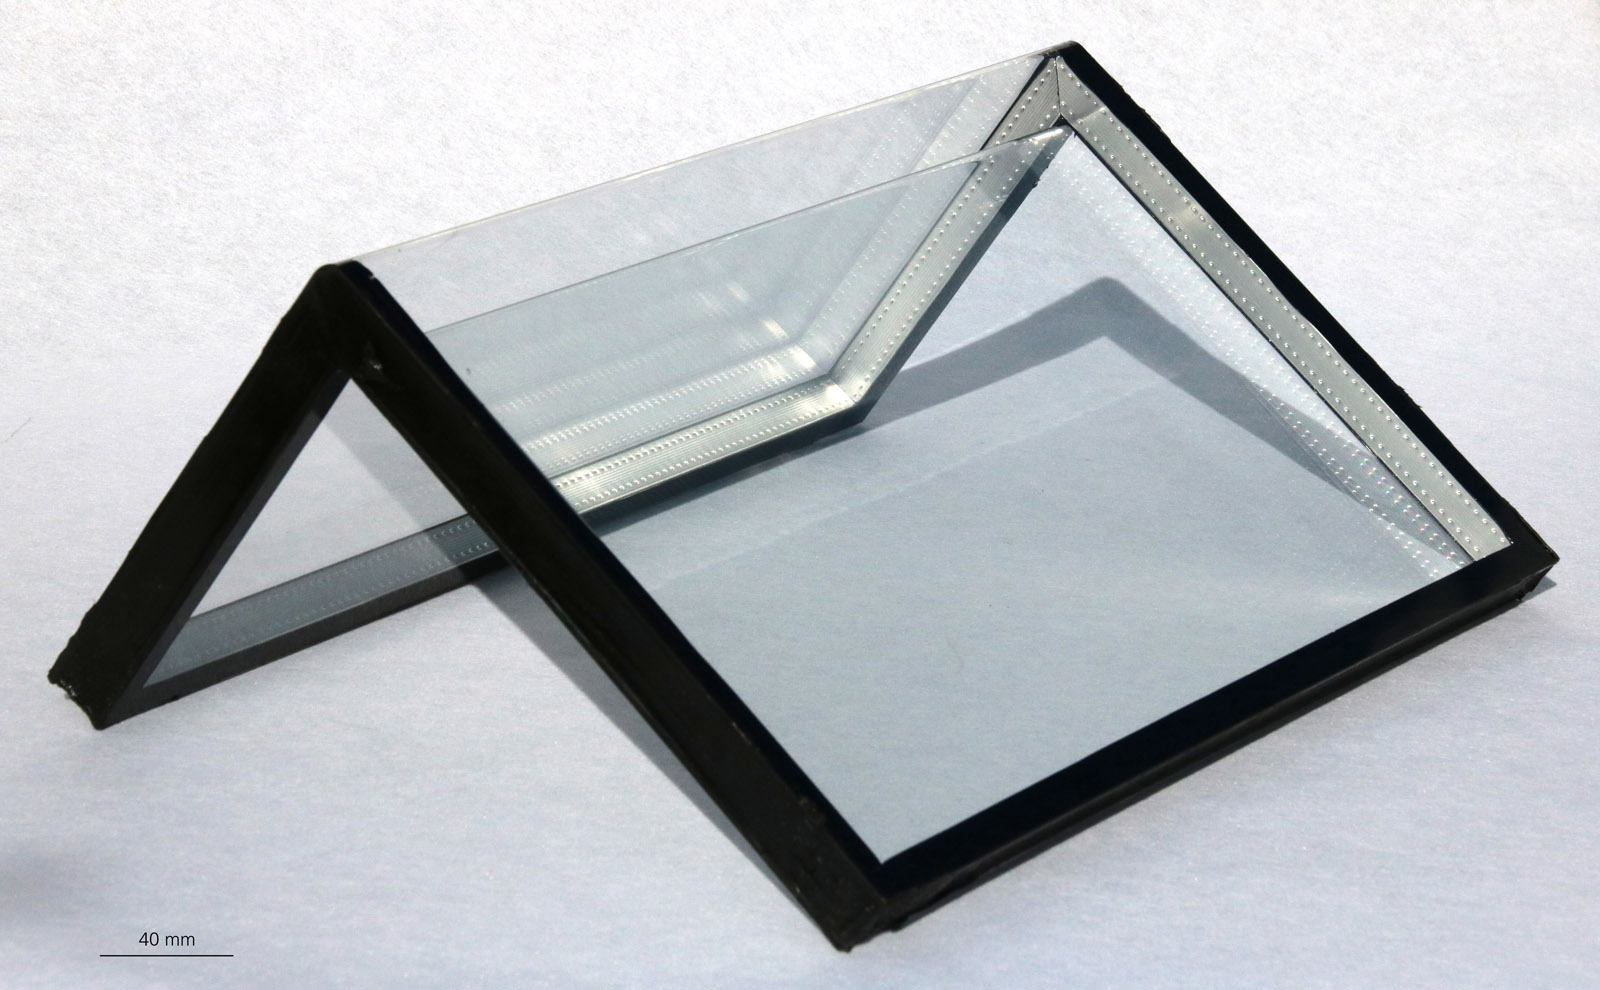 A double-glazed corner element produced with the new glass-bending process.